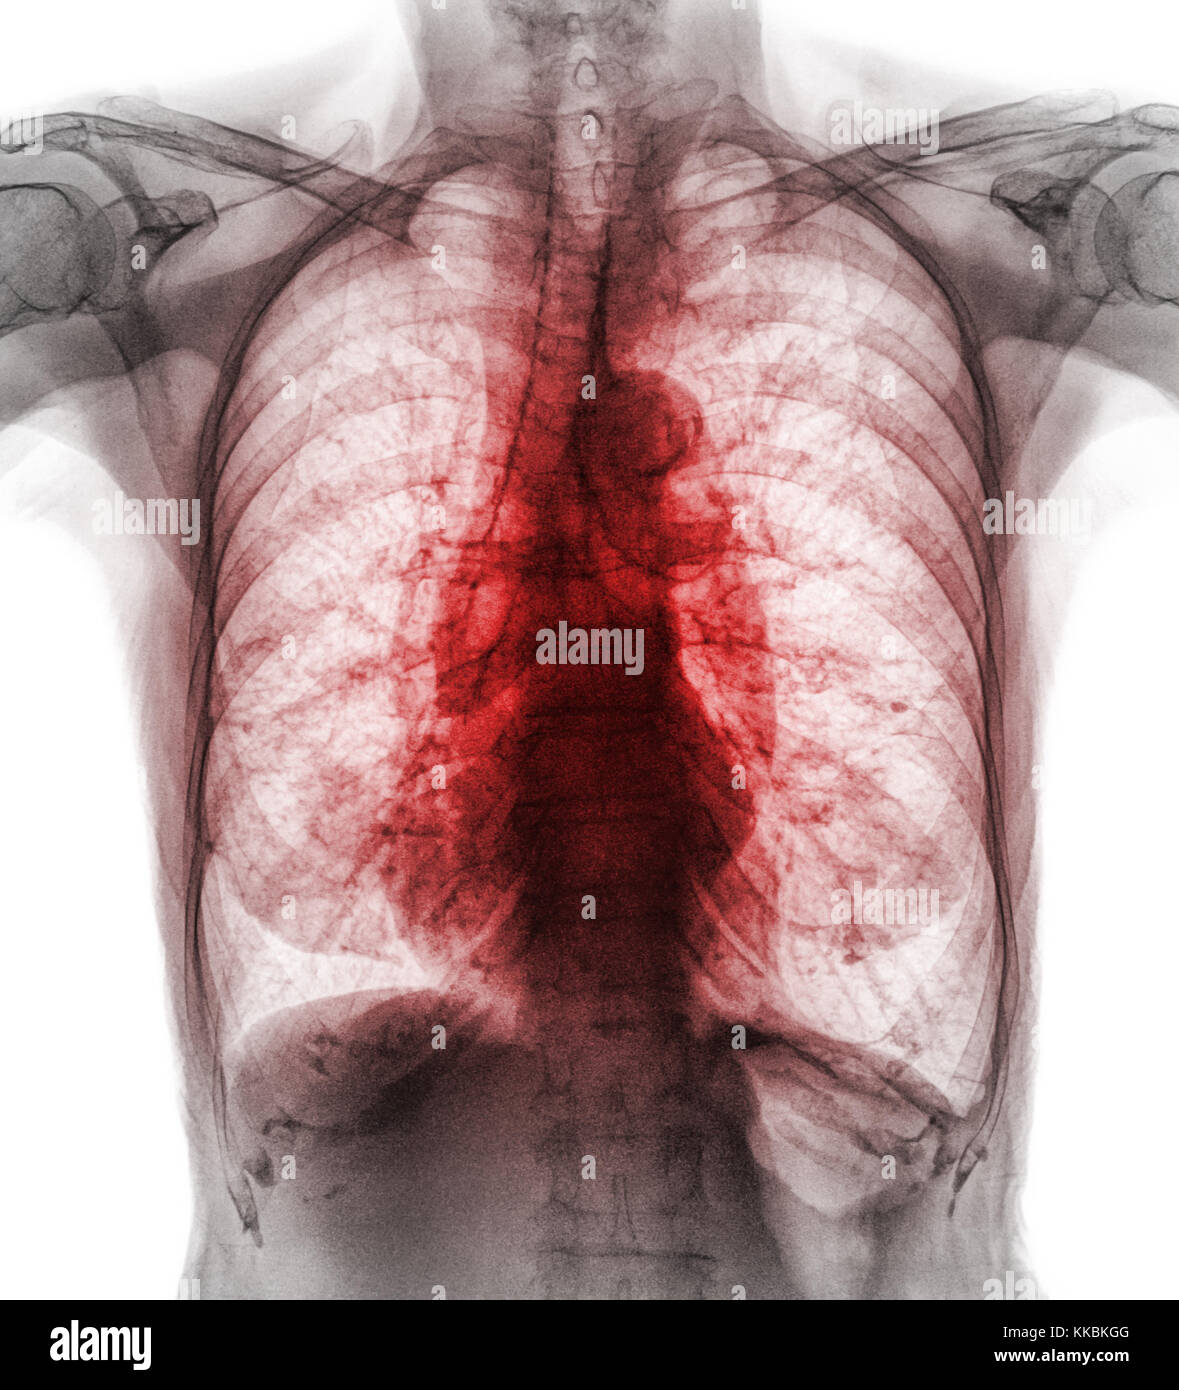 Pulmonary Tuberculosis . Film chest x-ray show interstitial infiltrate both lung due to Mycobacterium tuberculosis infection . Stock Photo